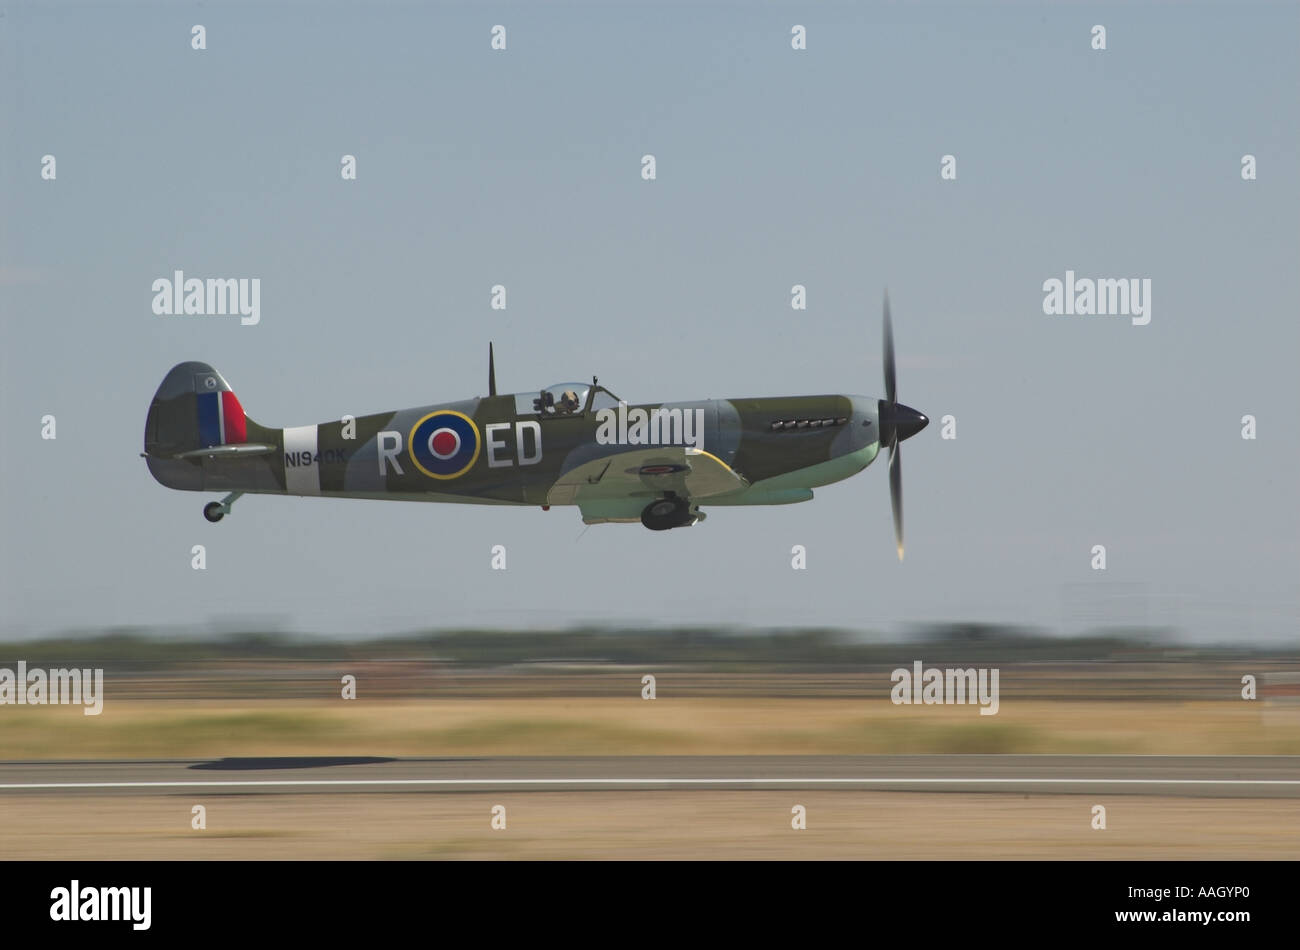 A British Spitfire flying close to the ground as landing gear goes up. Stock Photo